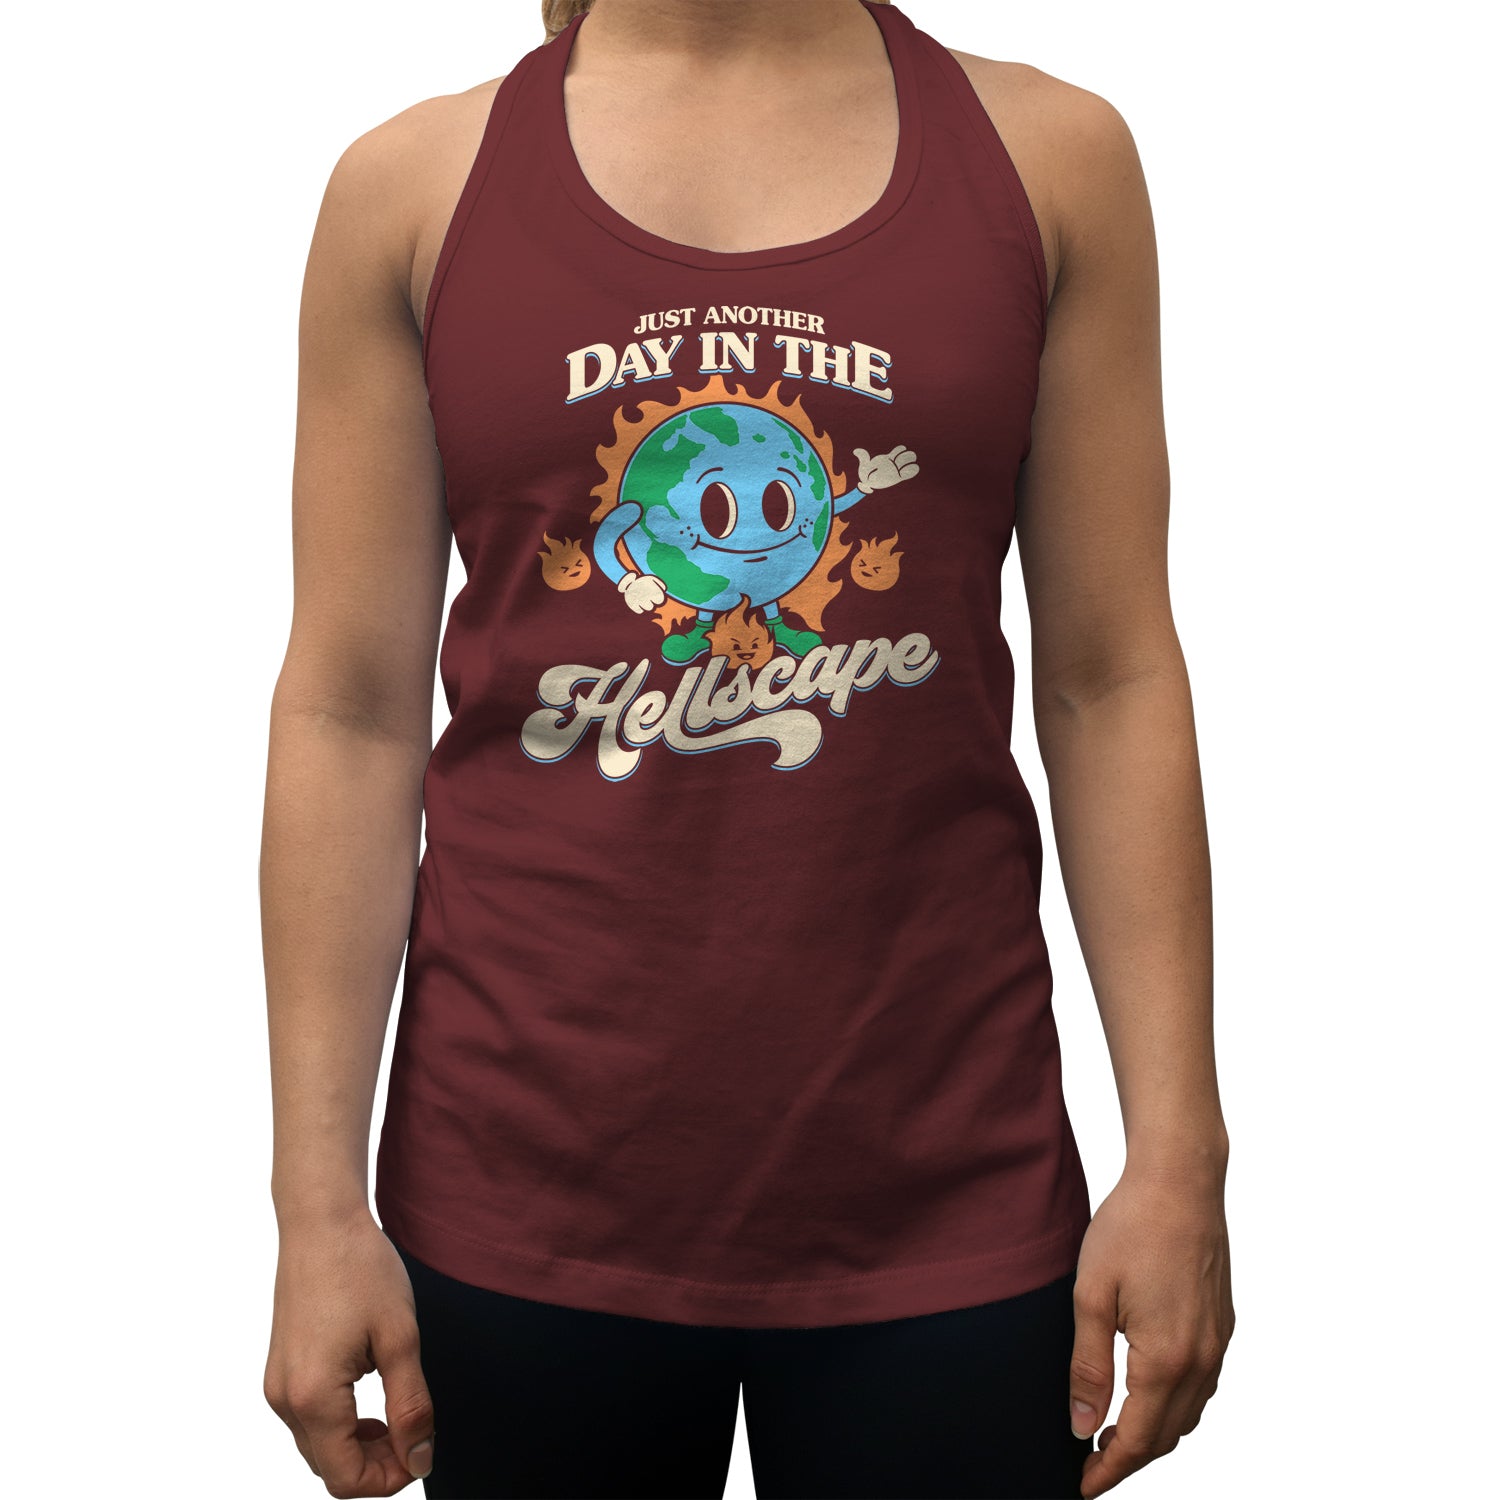 Women's Just Another Day in the Hellscape Racerback Tank Top